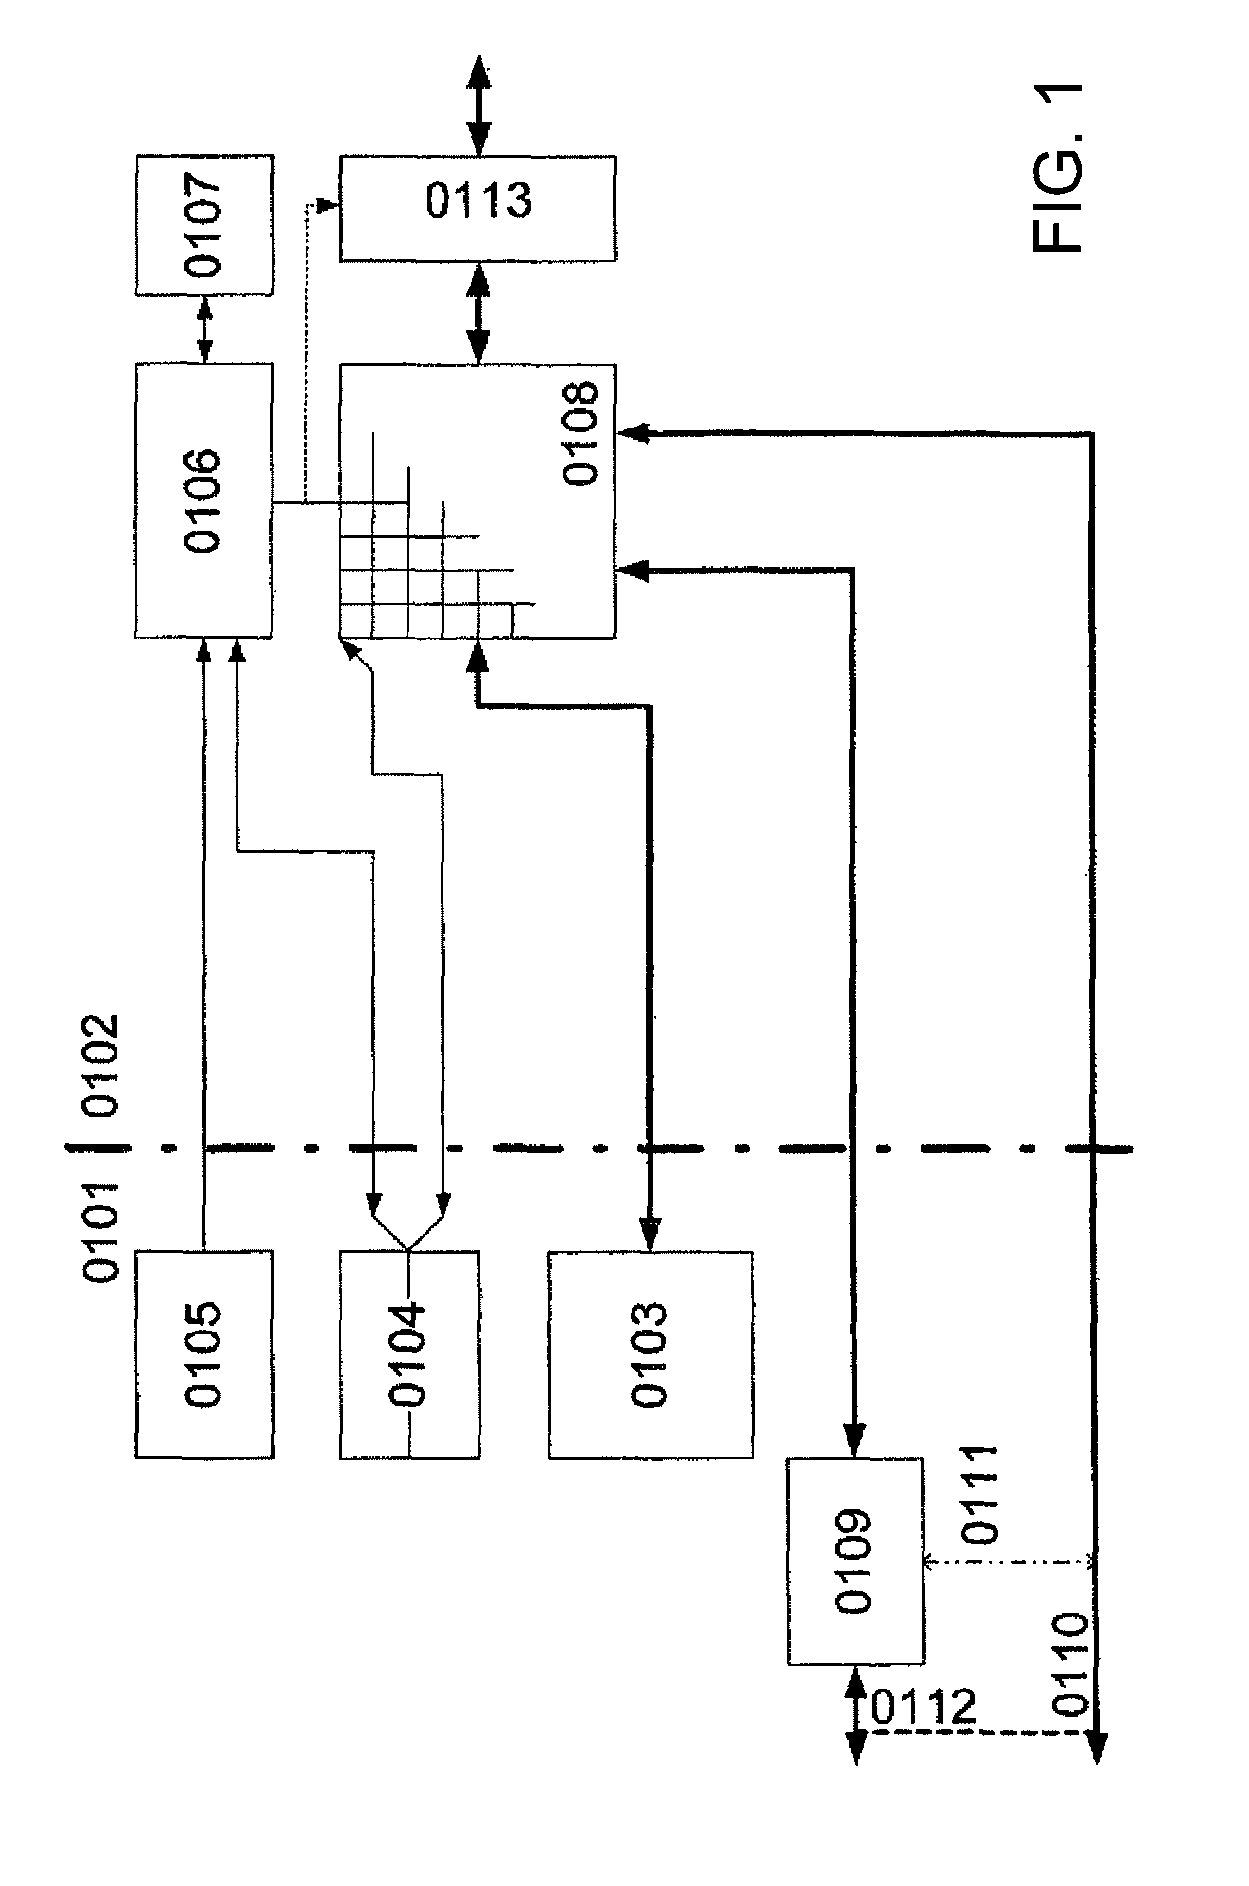 Data processing system having integrated pipelined array data processor